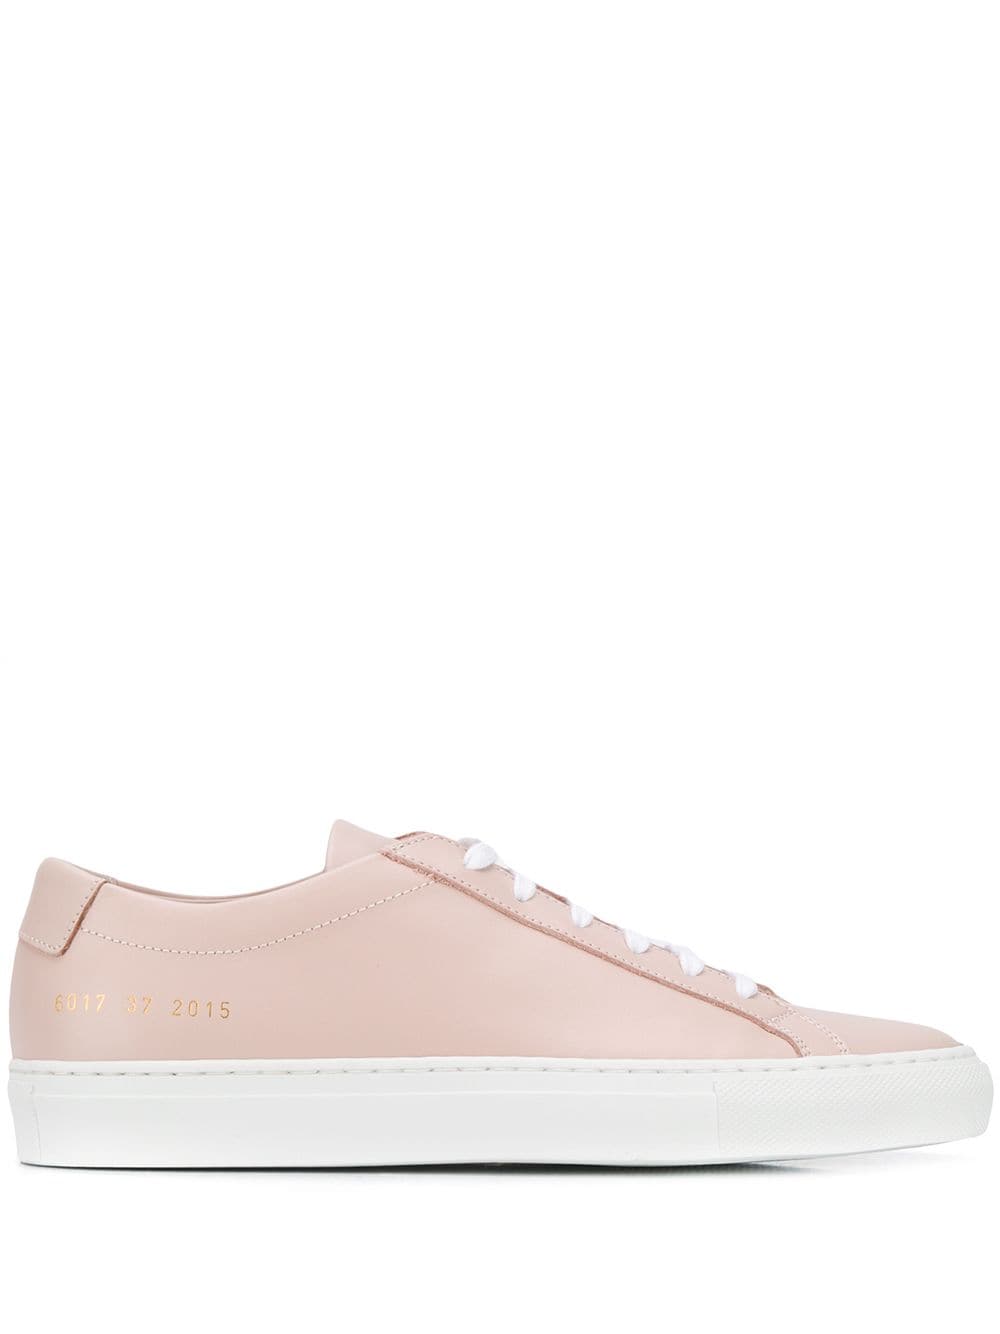 common projects pink